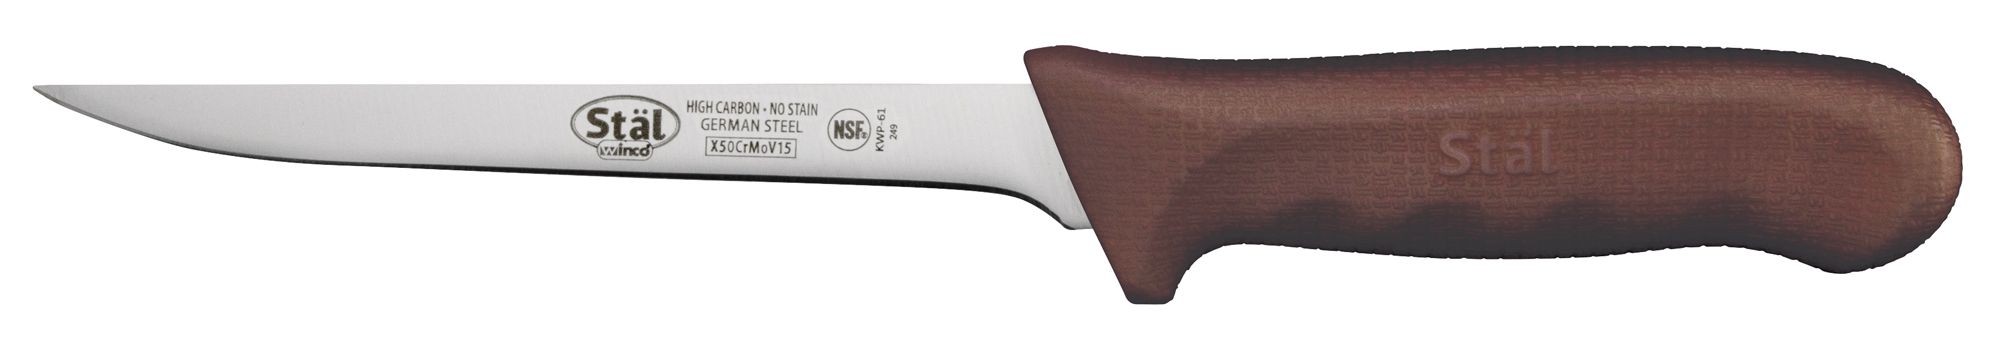 Winco KWP-61N Narrow 6" Boning Knife with Brown Handle